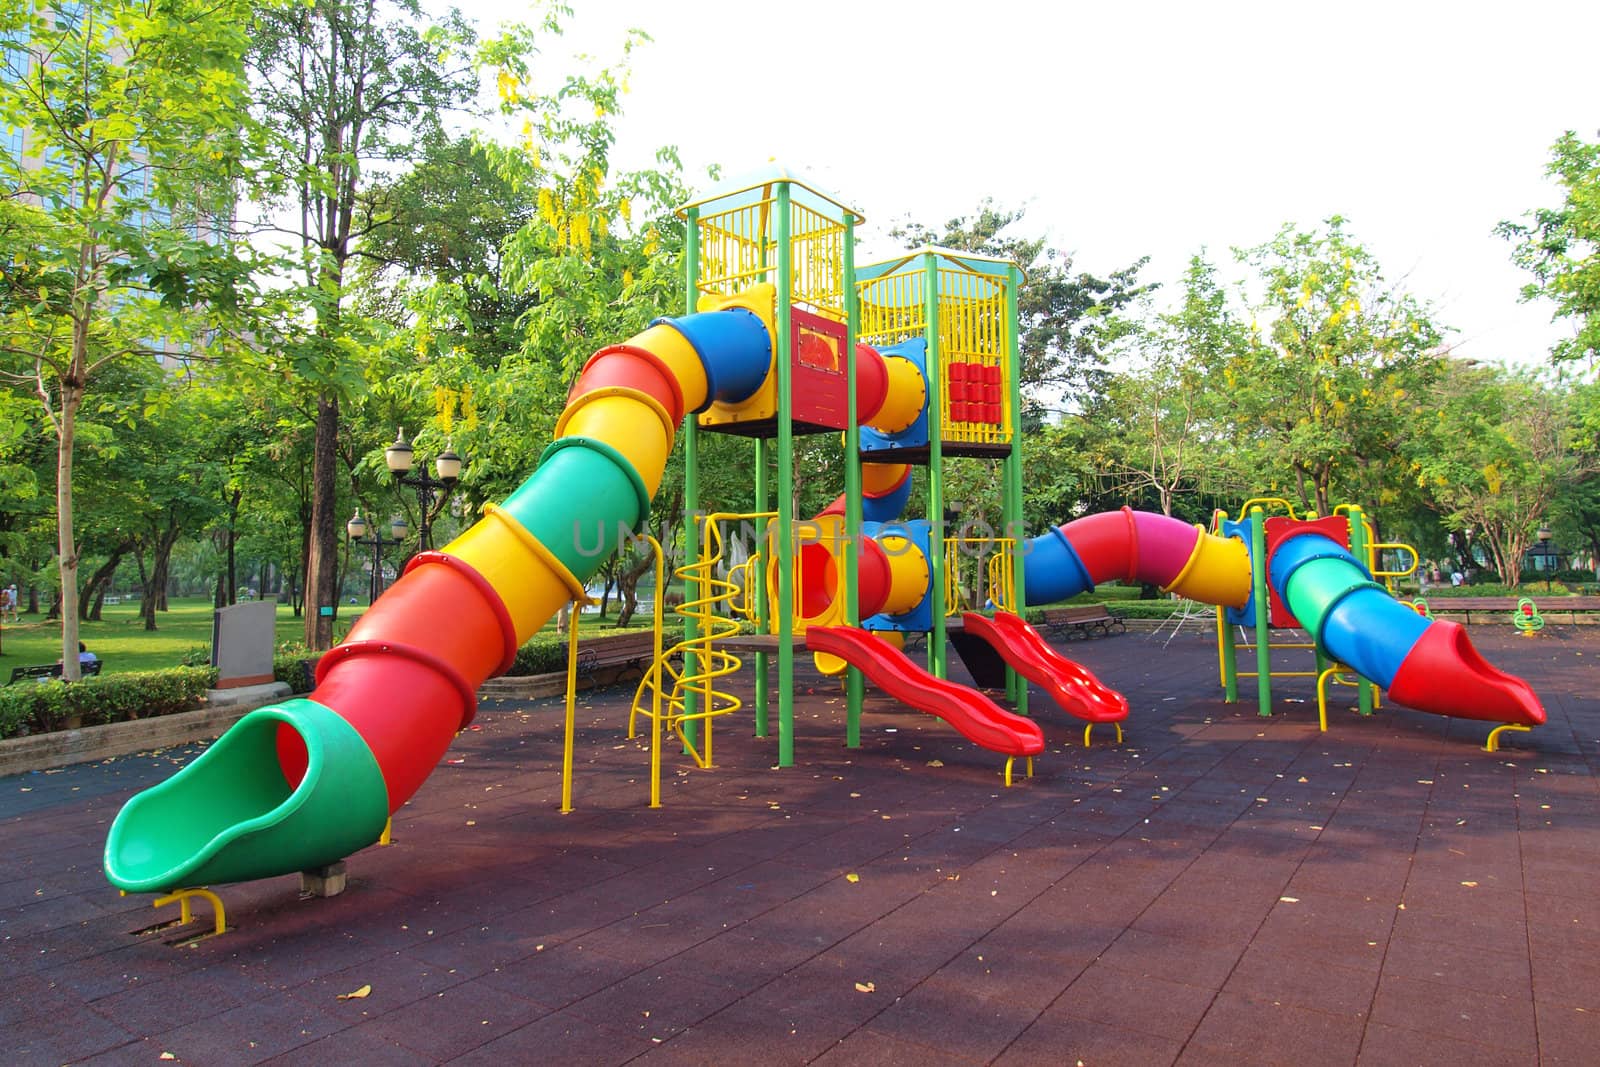 Colorful playground in a city park